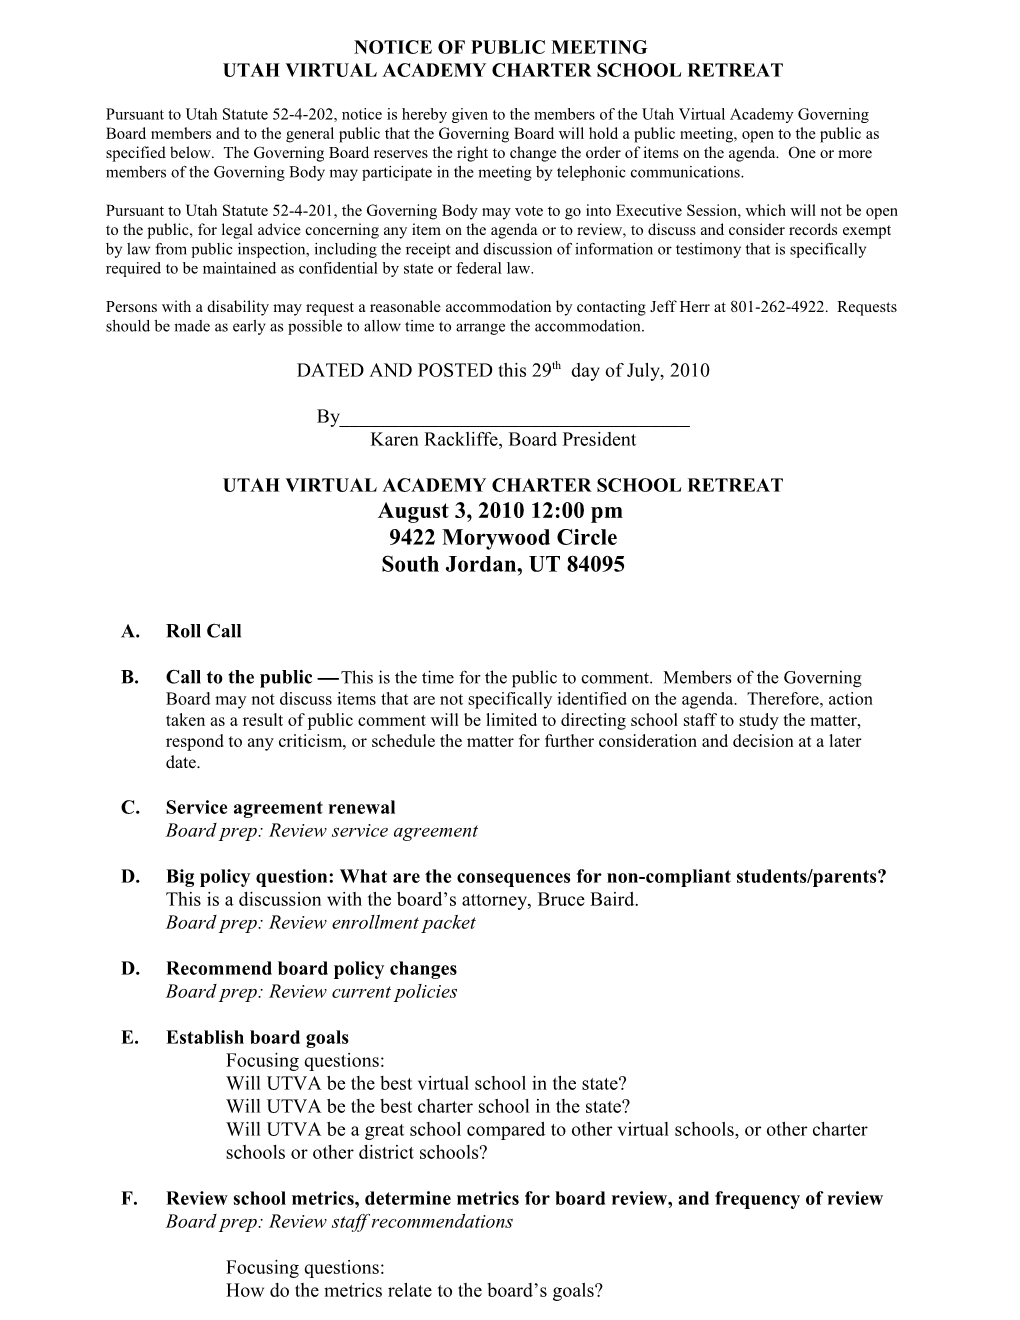 Charter School Corrective Action Plan Submission Action Item